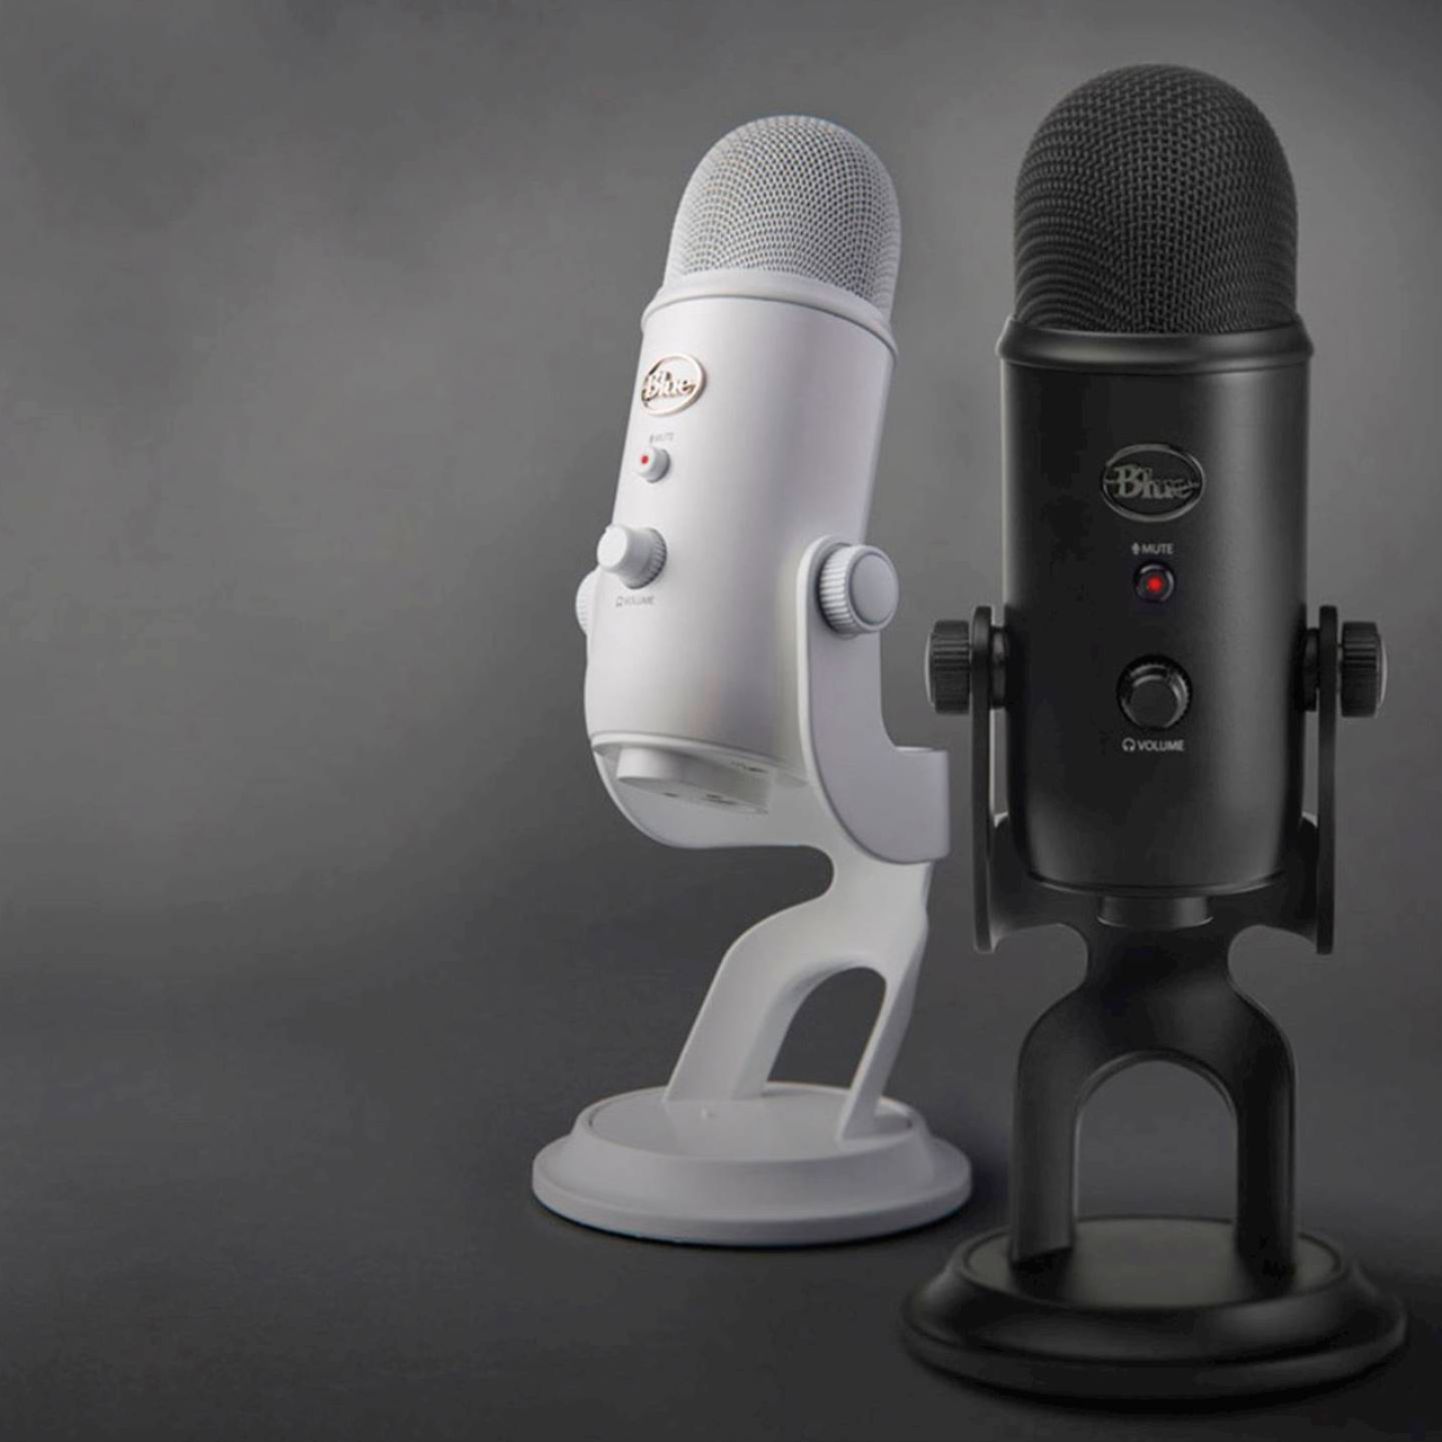 Pump up gaming and streaming with new Yeti mics and Litra lights